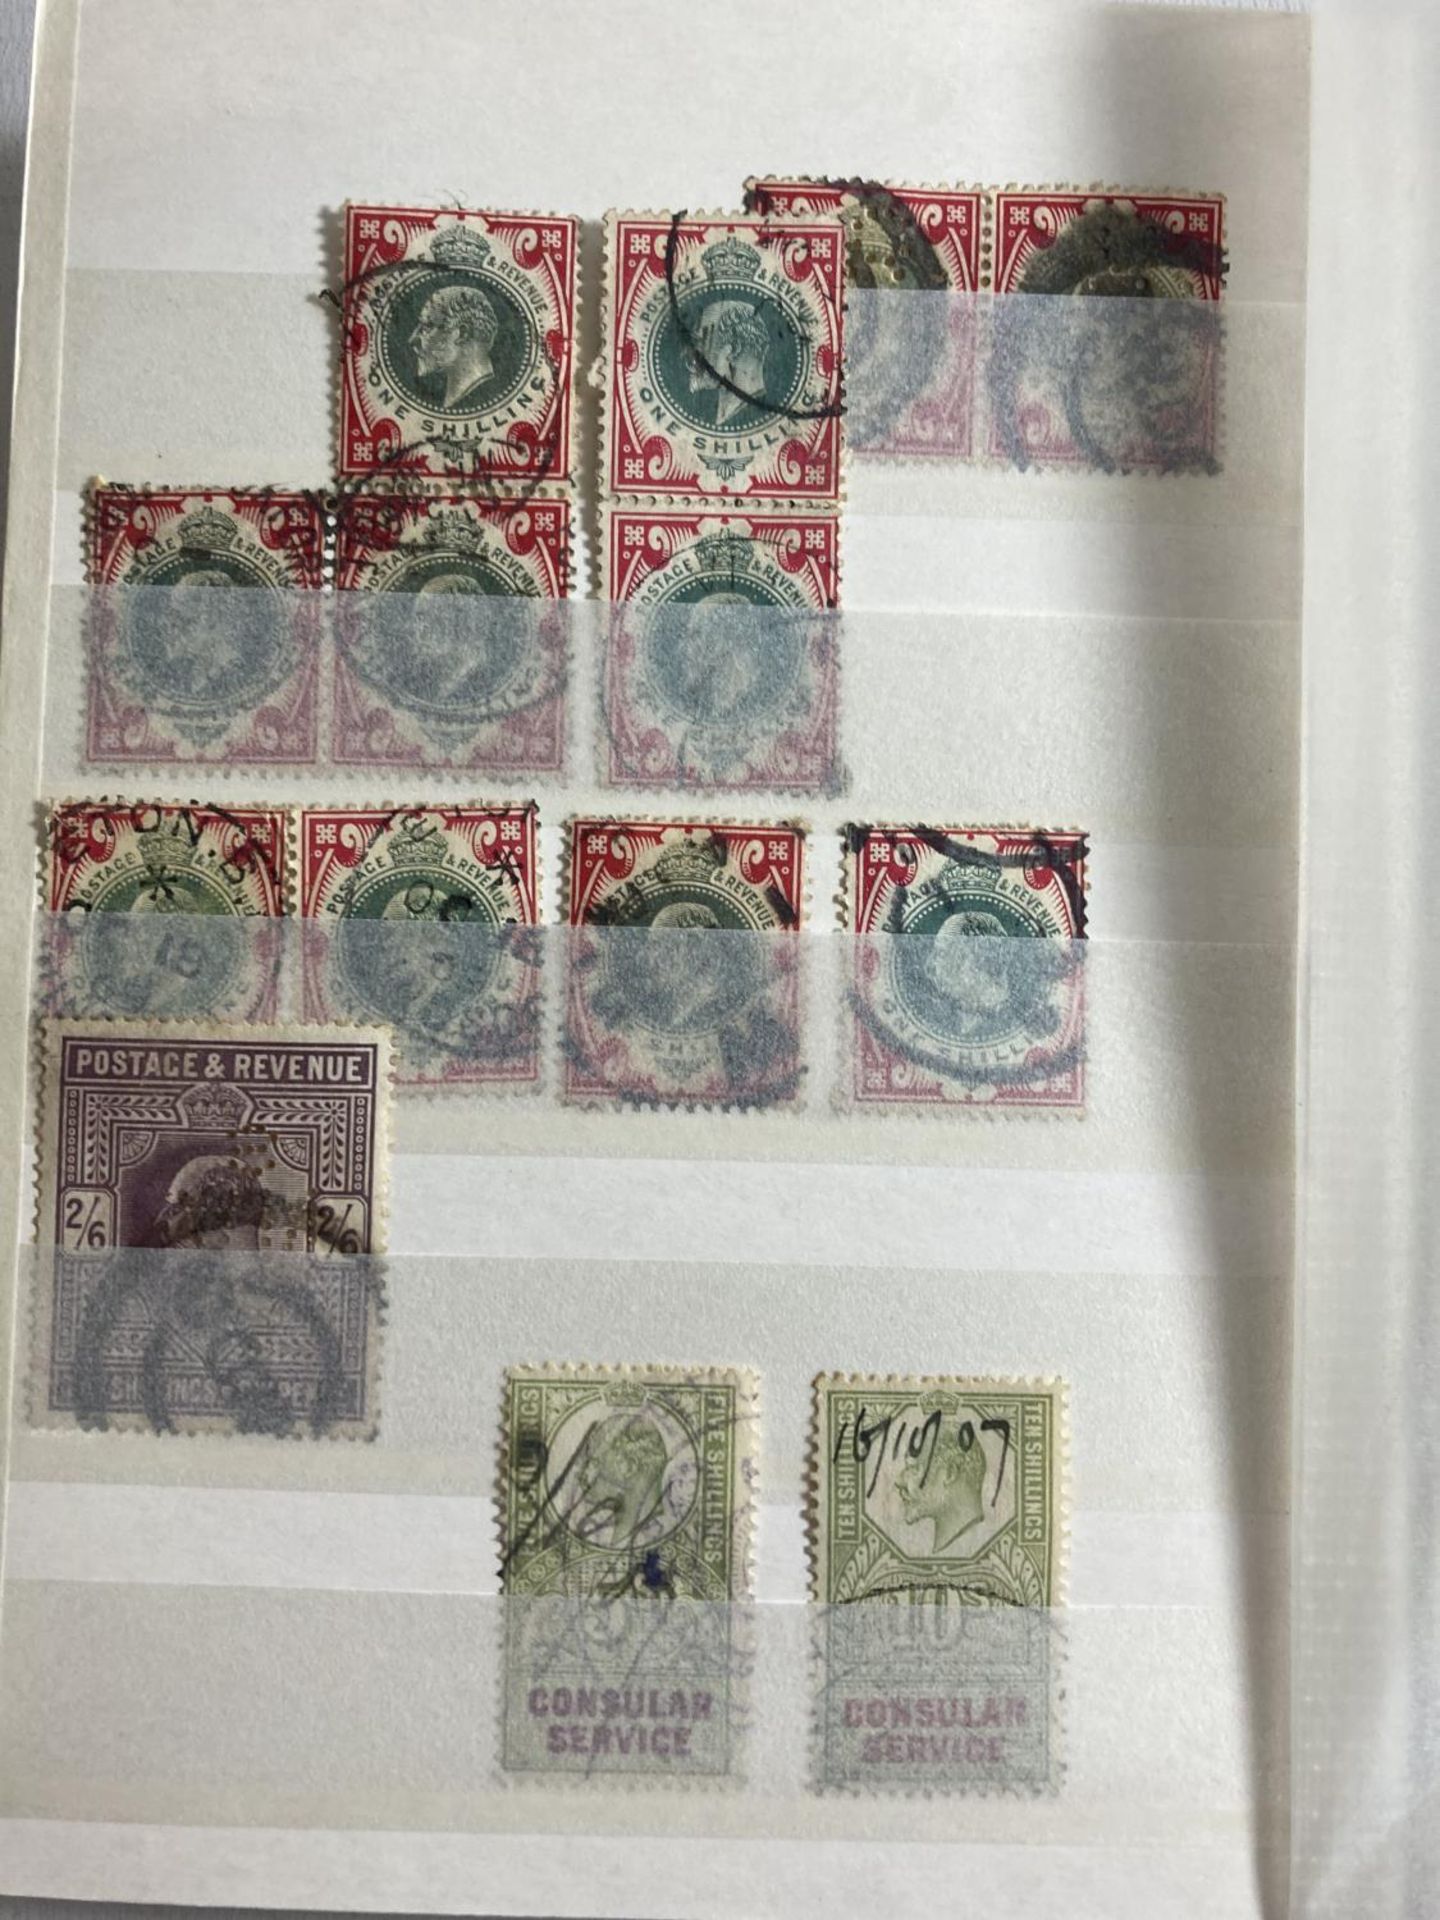 SMALL RED STOCK BOOK CONTAINING GB , QV-GV . TWO 1840 2D BLUES ARE PRESENT PLUS QV TO 1/- AND EV11 - Image 3 of 4